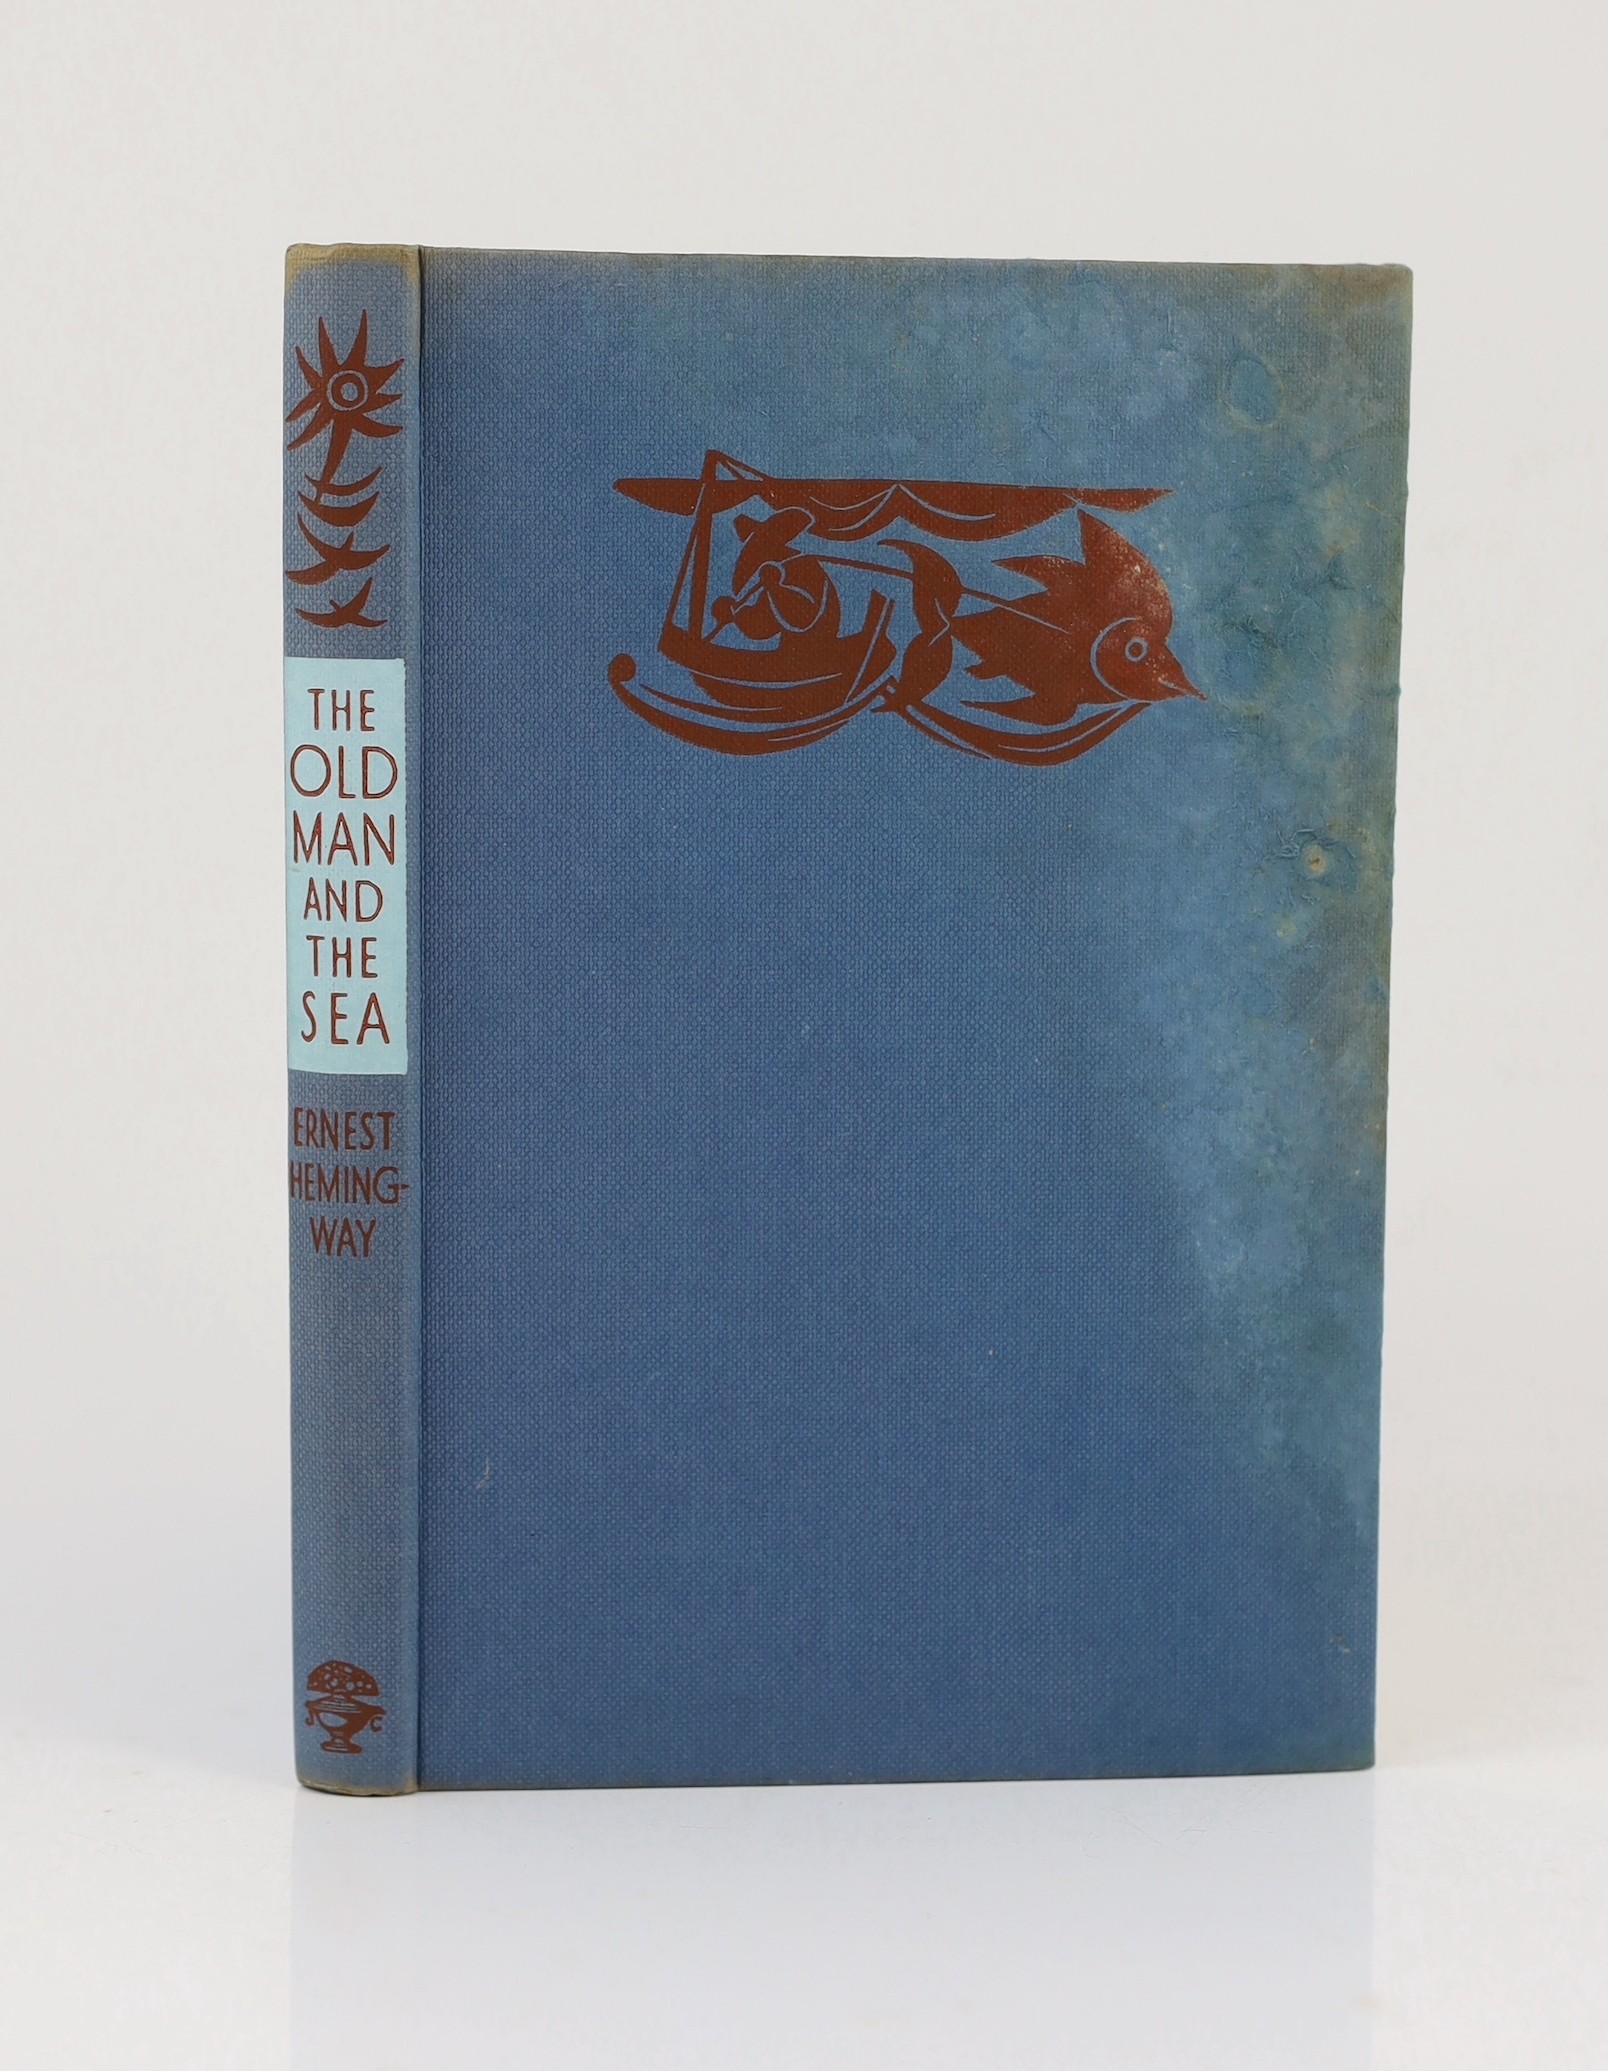 Hemingway, Ernest - The Old Man and the Sea, 1st UK edition, 8vo, the unclipped d/j with loss to right front panel and spine head, ownership inscription to front fly leaf, Jonathan Cape, London, 1952